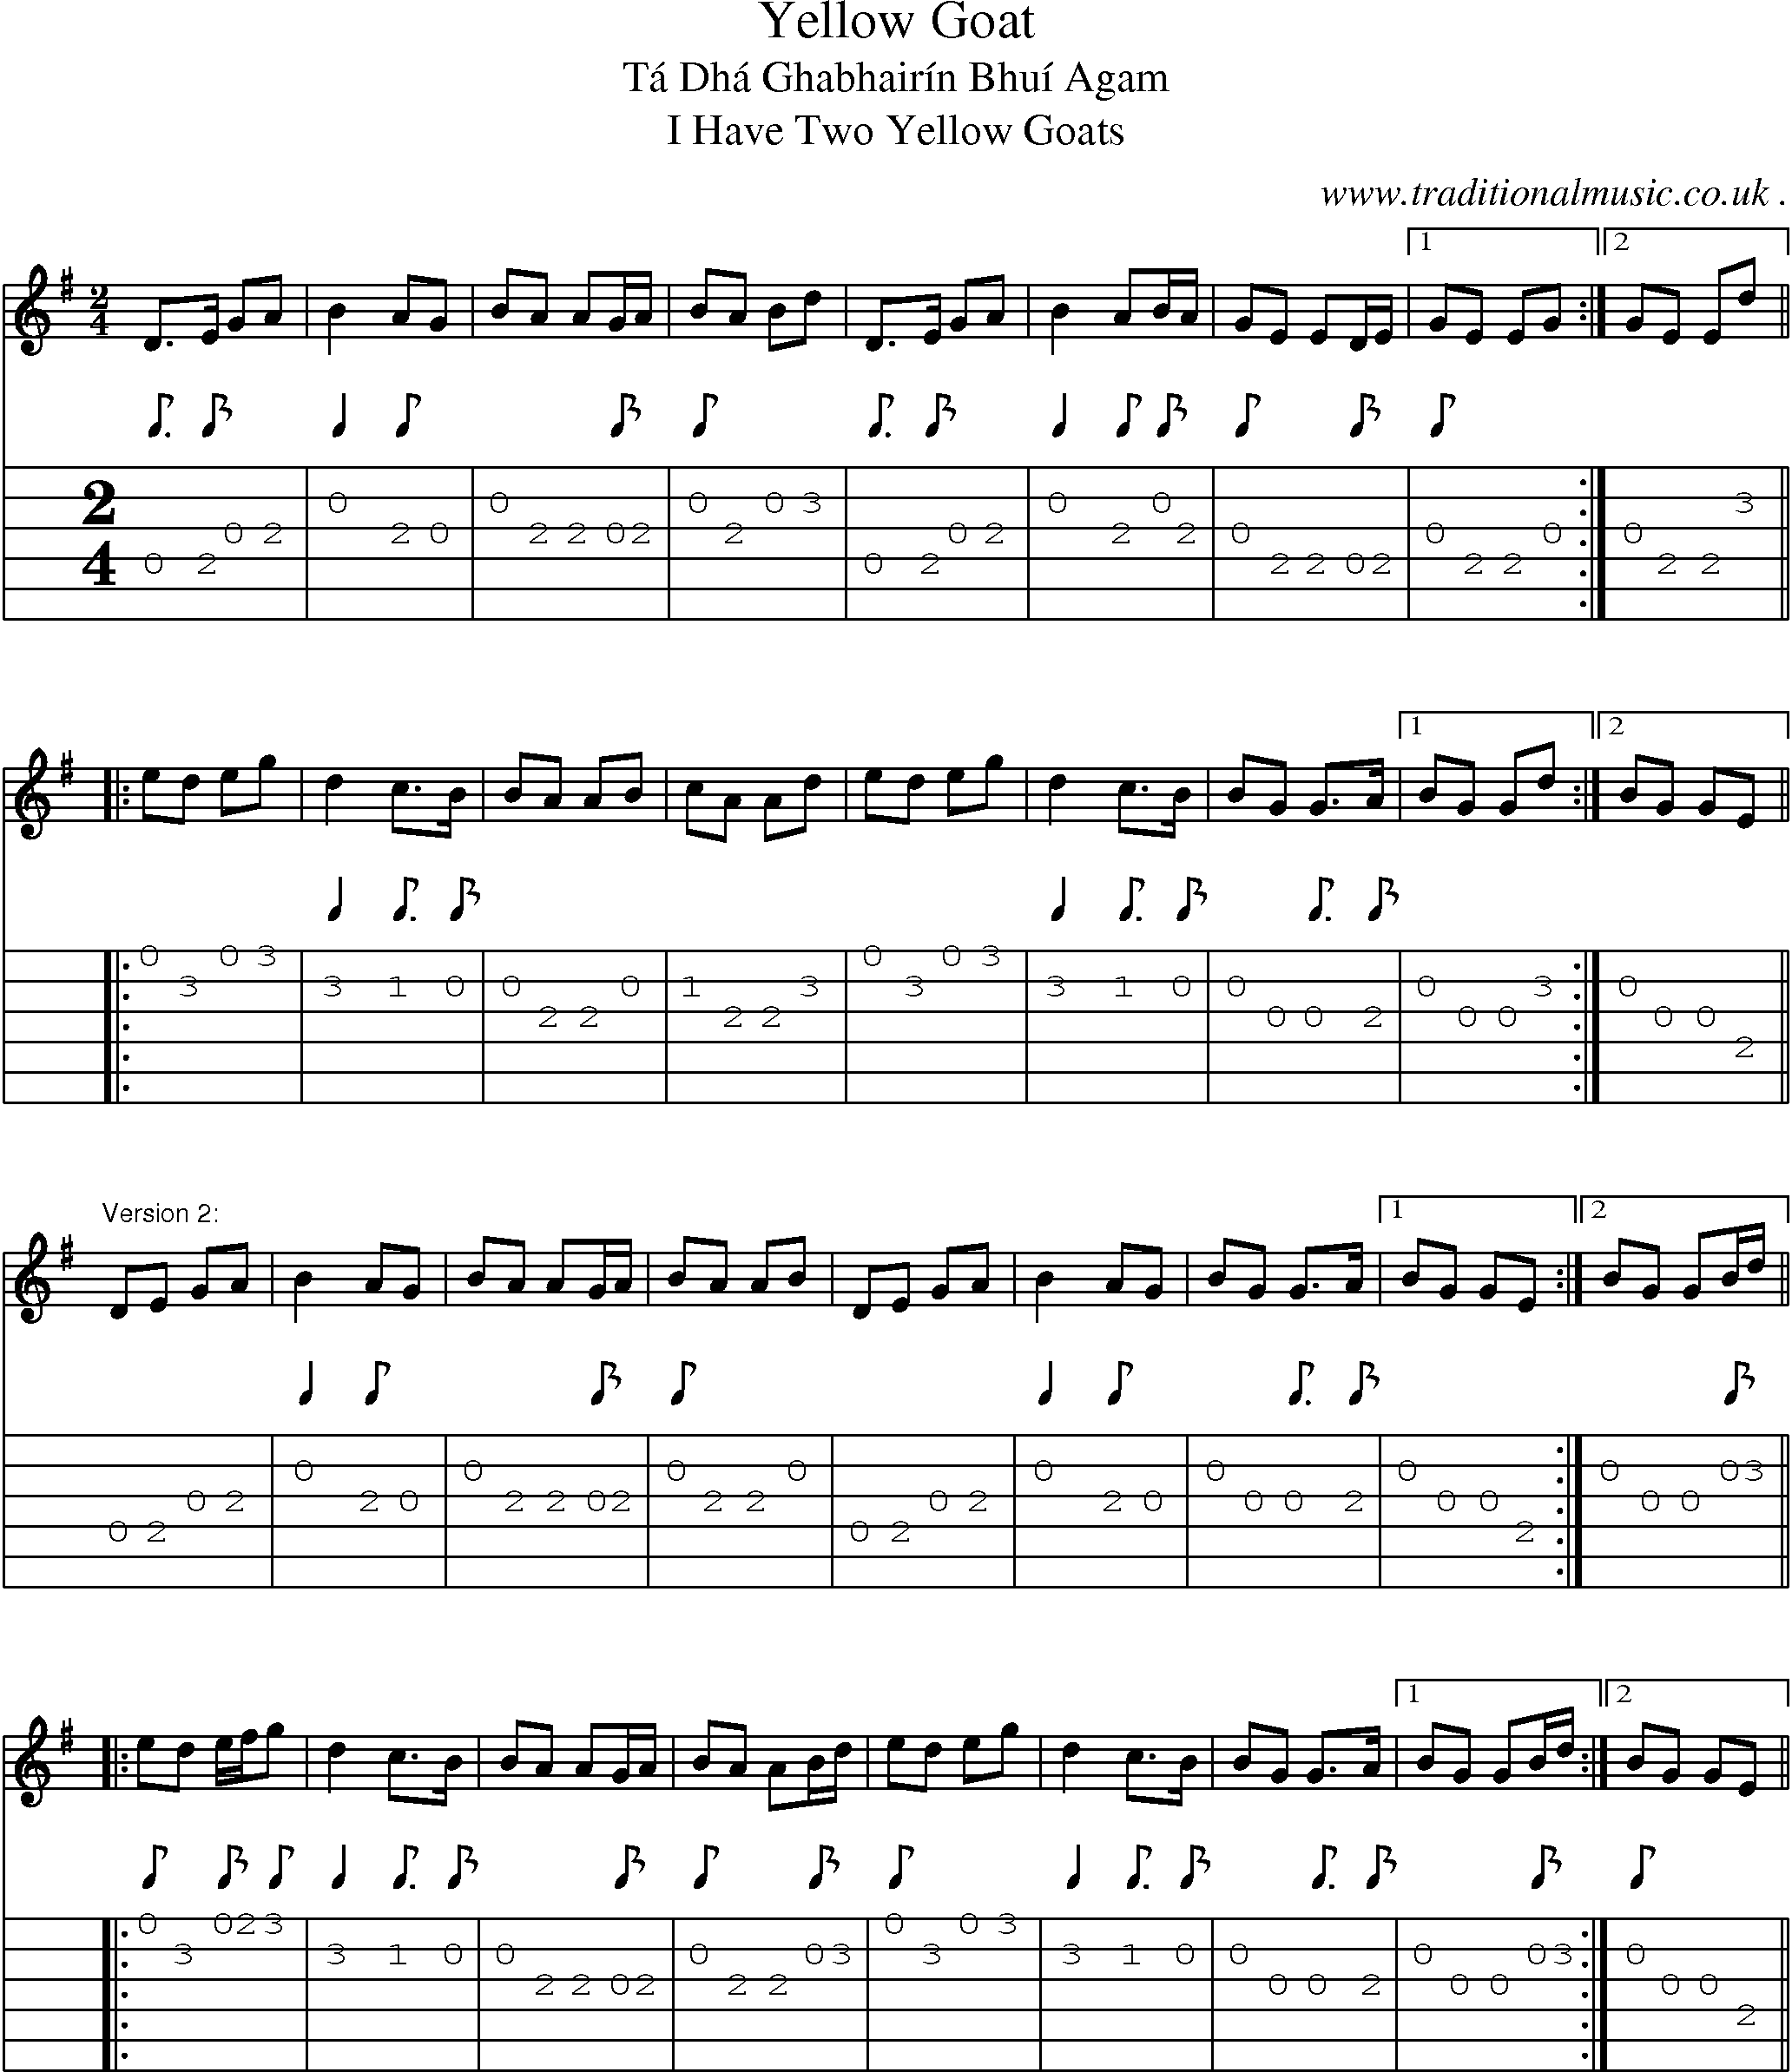 Sheet-Music and Guitar Tabs for Yellow Goat